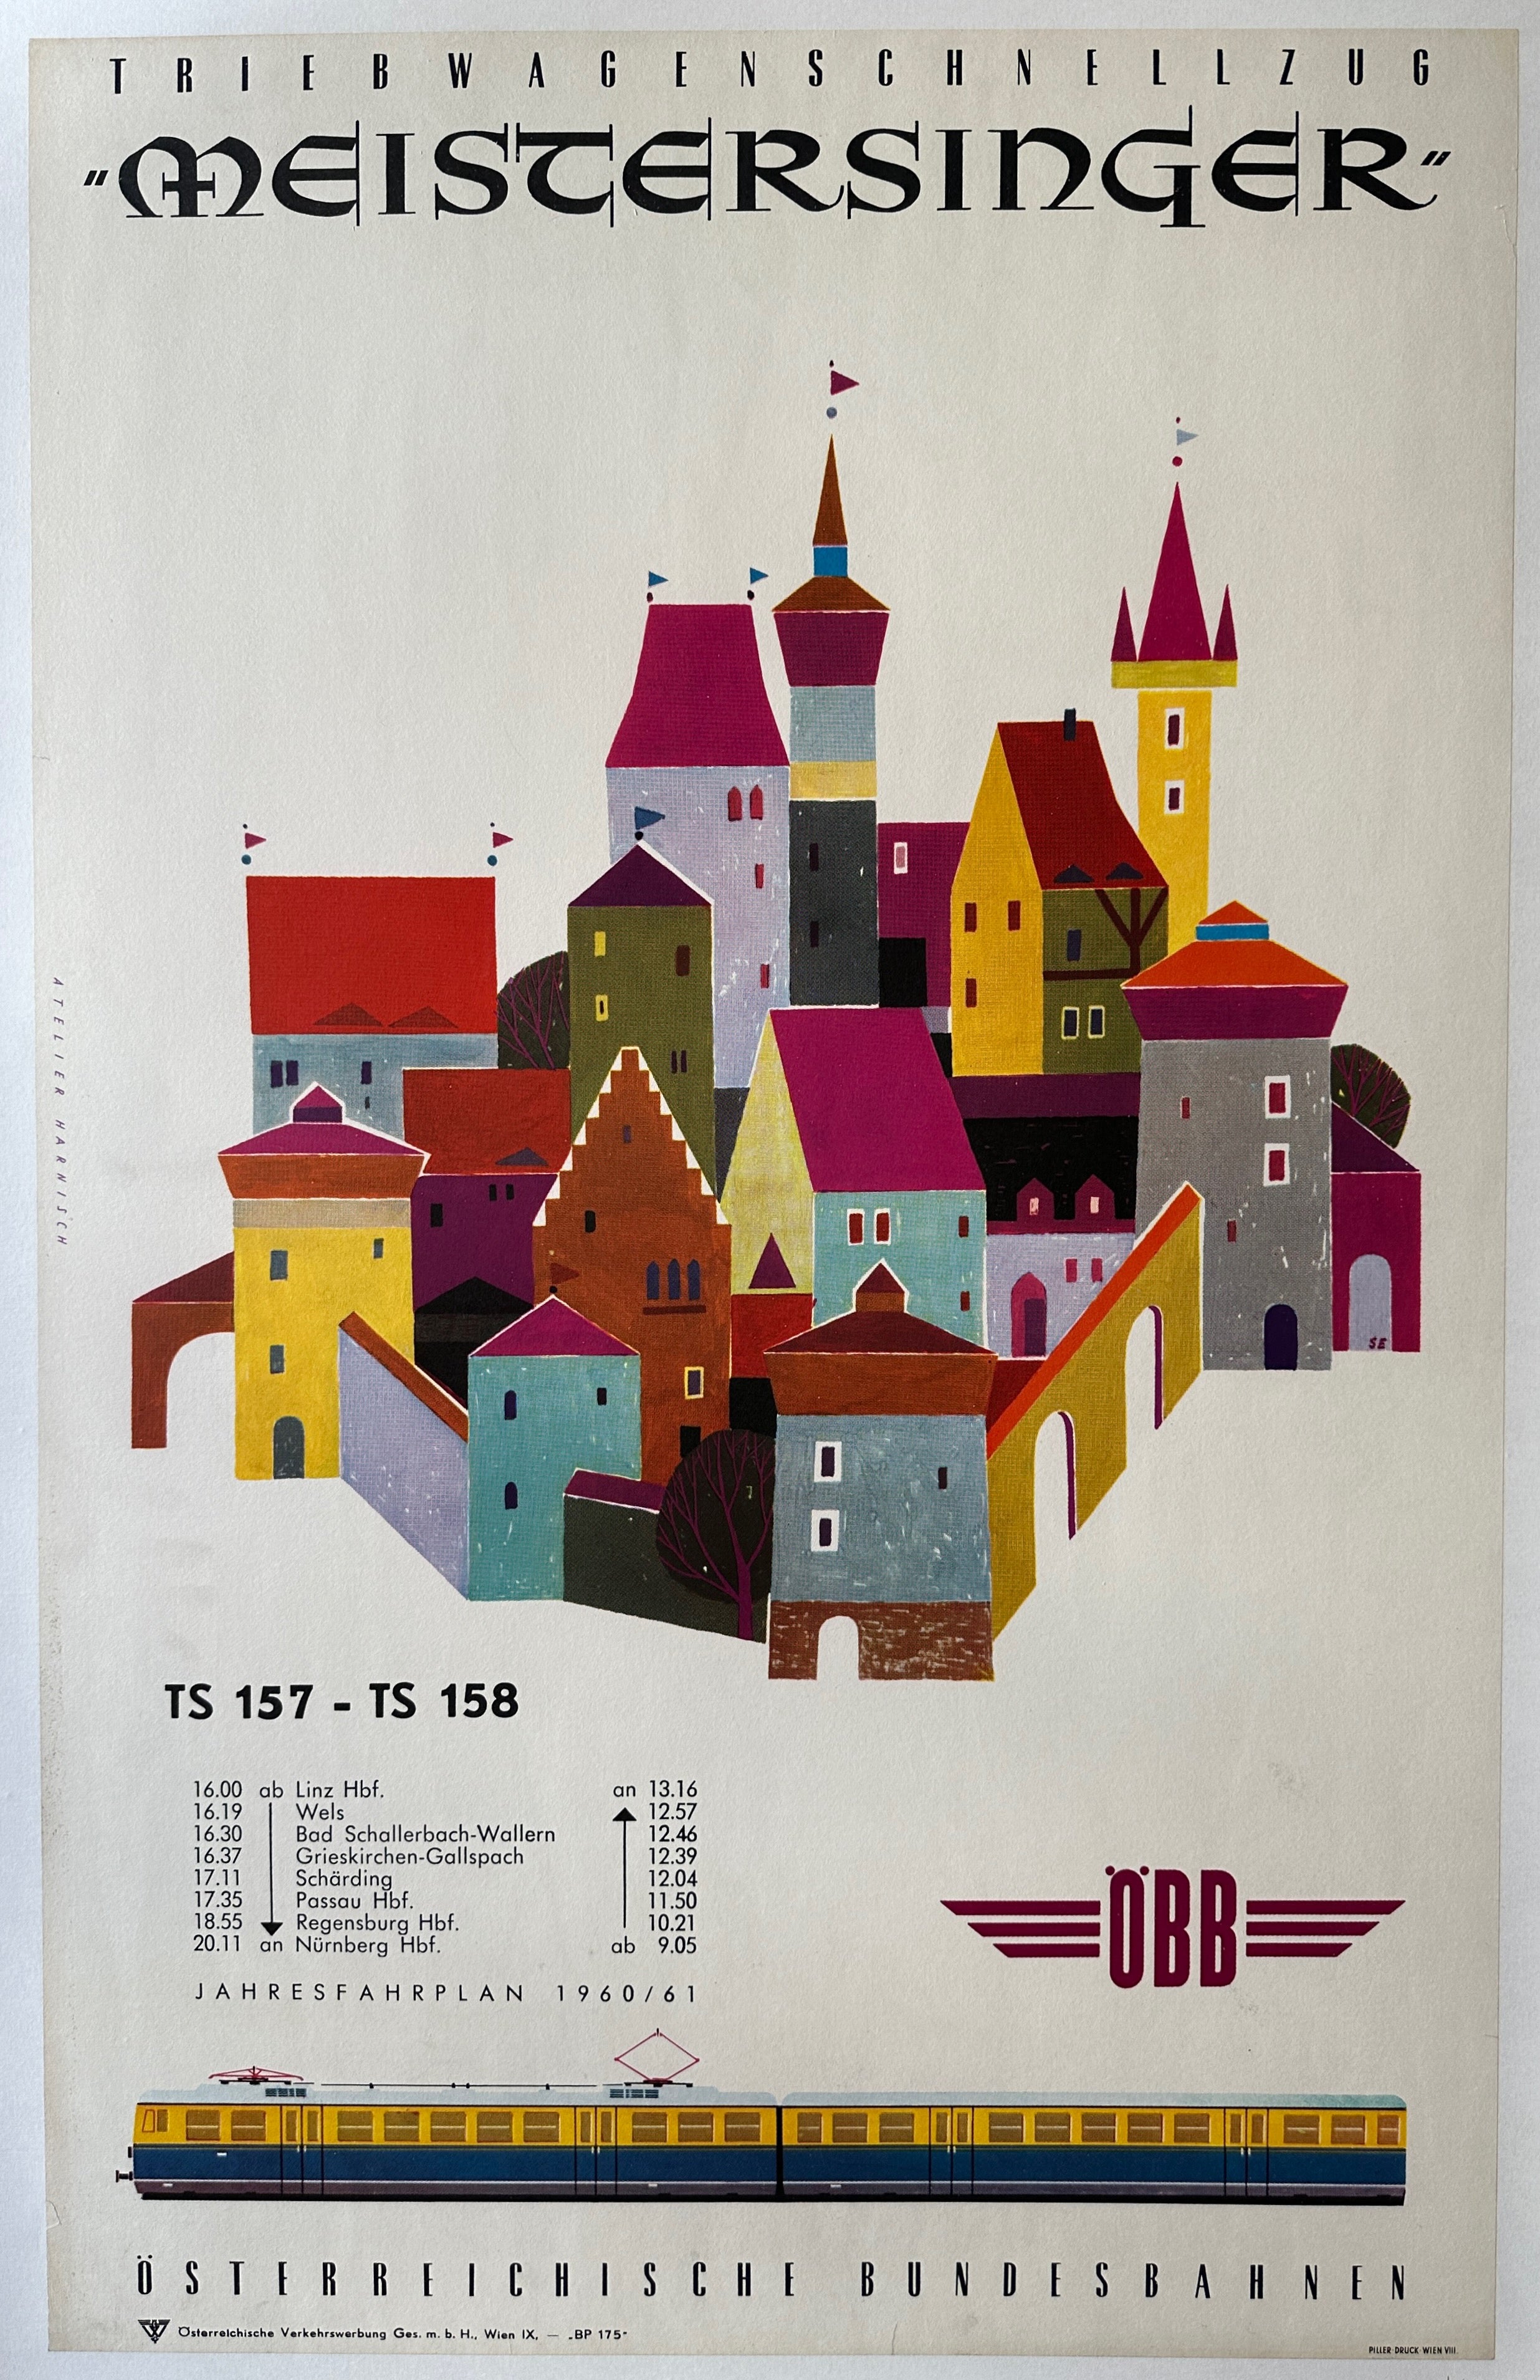 25x39 linen backed railway poster promoting travel to Germany and featuring an illustration of towers and castles overlapping against a white background